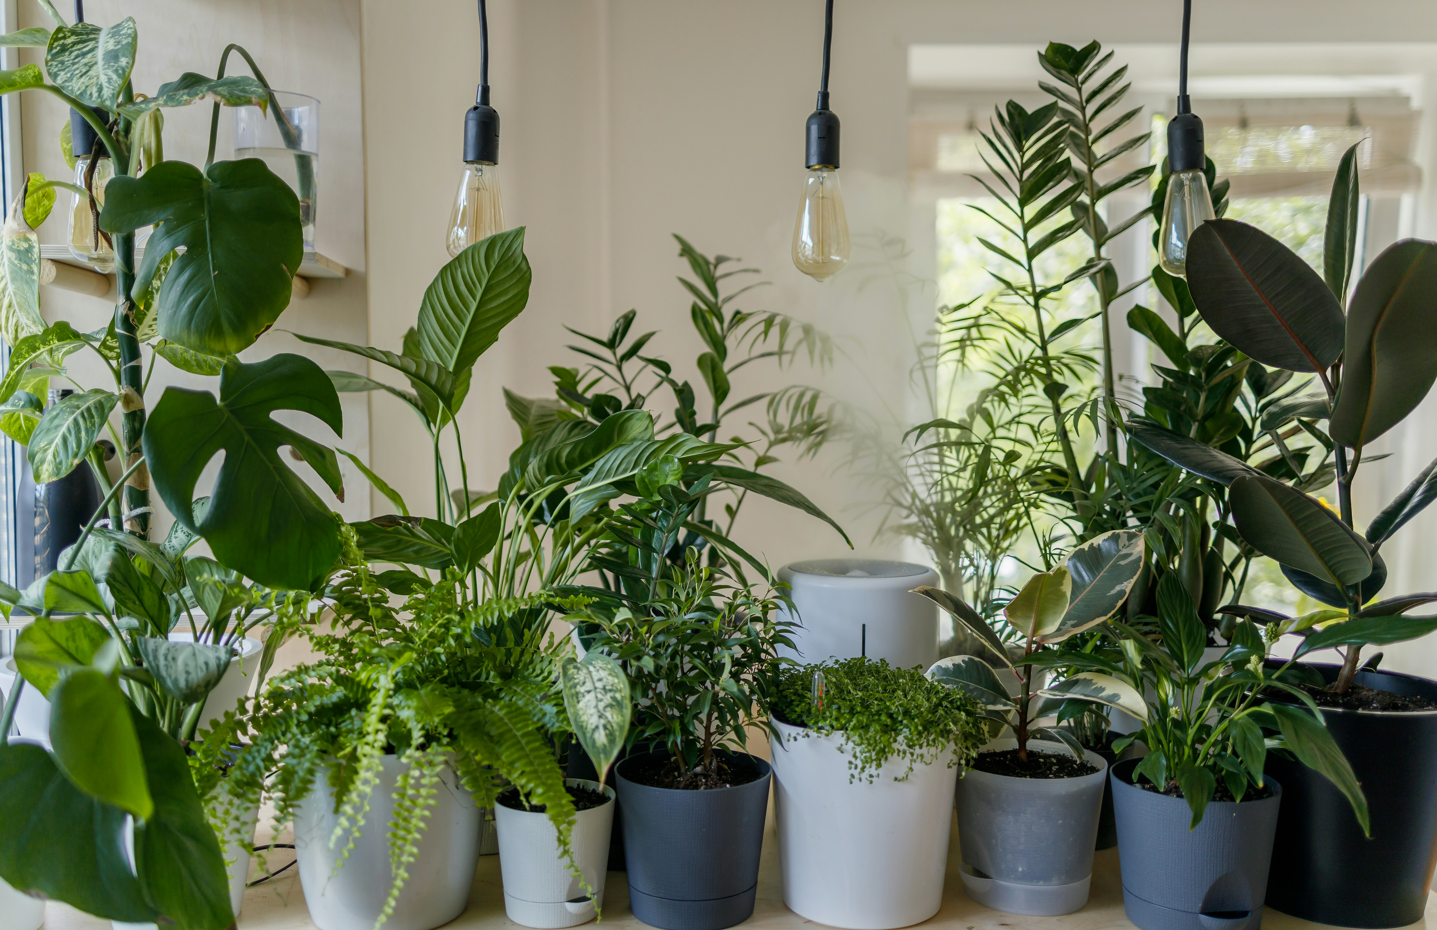 How to take care of a house plant: the basics